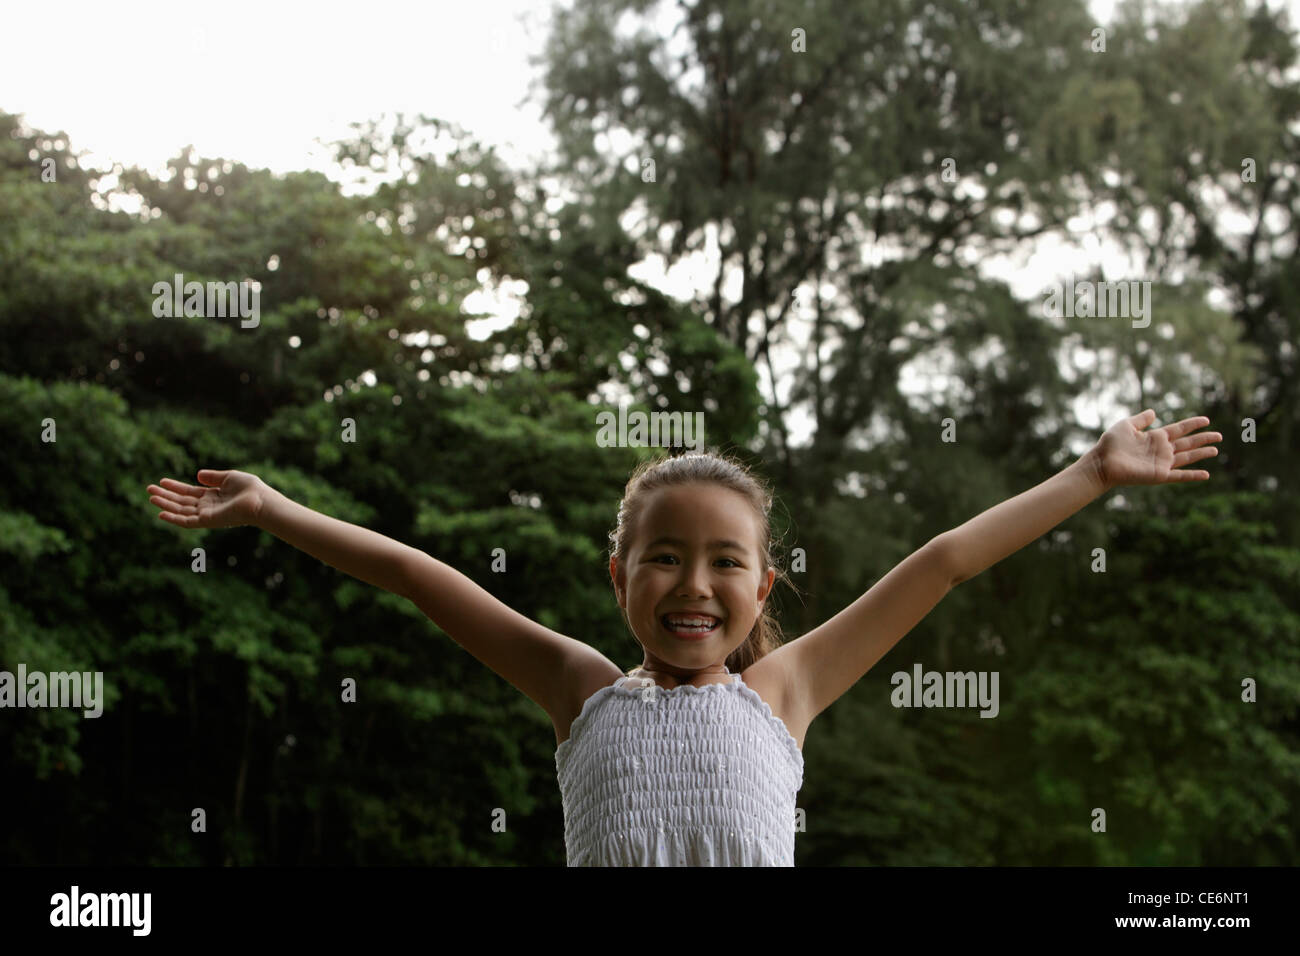 young girl with ams outstretched smiling at camera Stock Photo